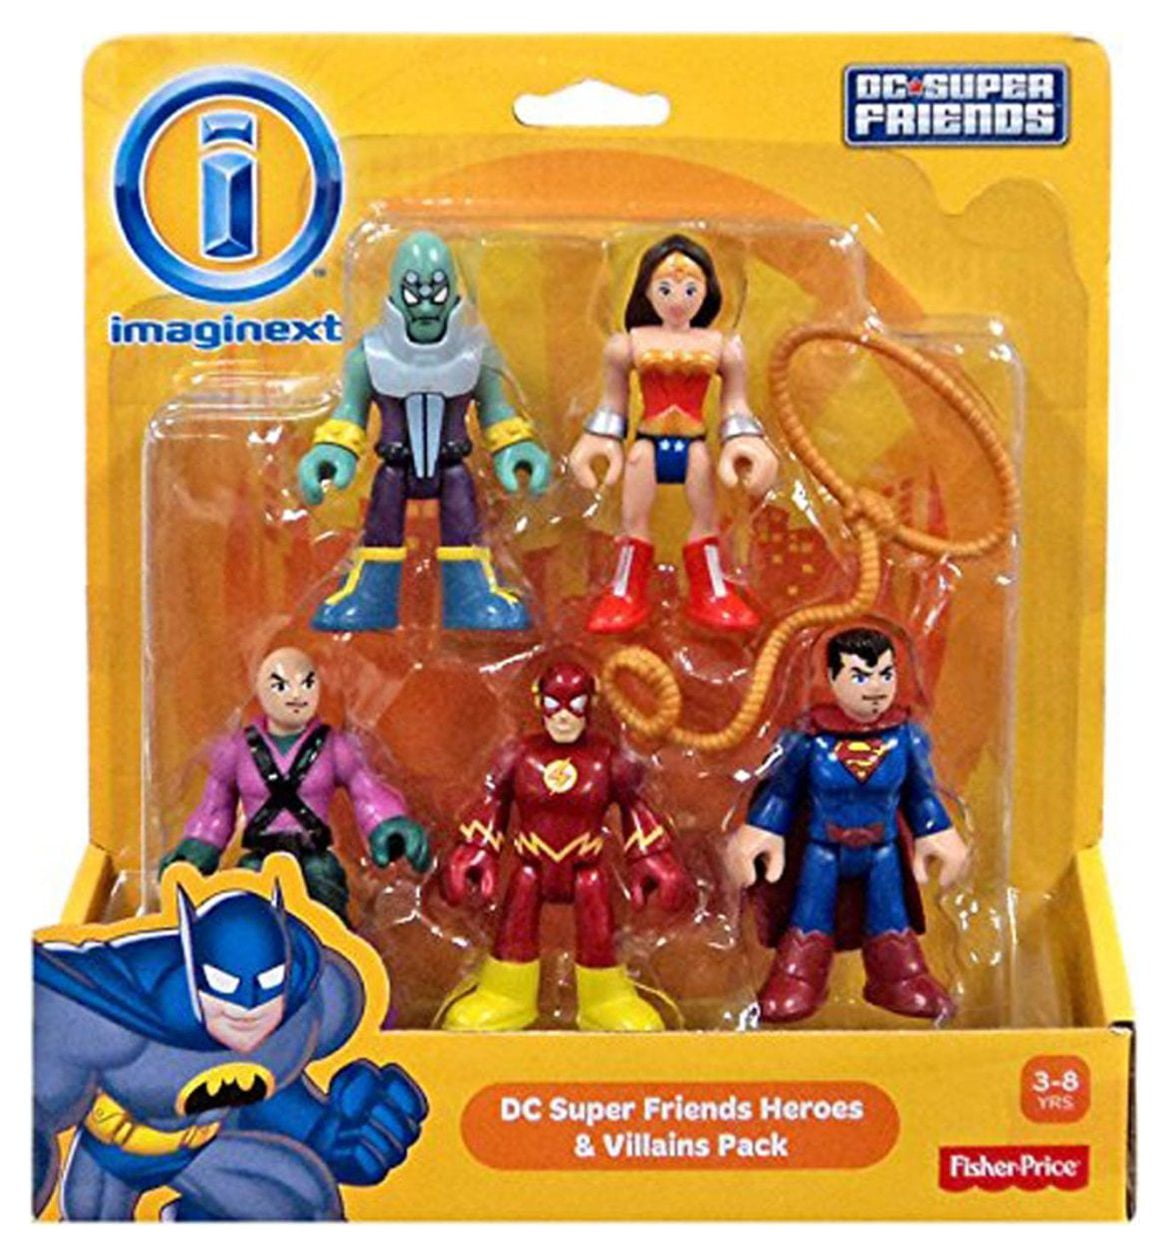 Fisher-Price Imaginext DC Super Friends Heroes & Villains Pack